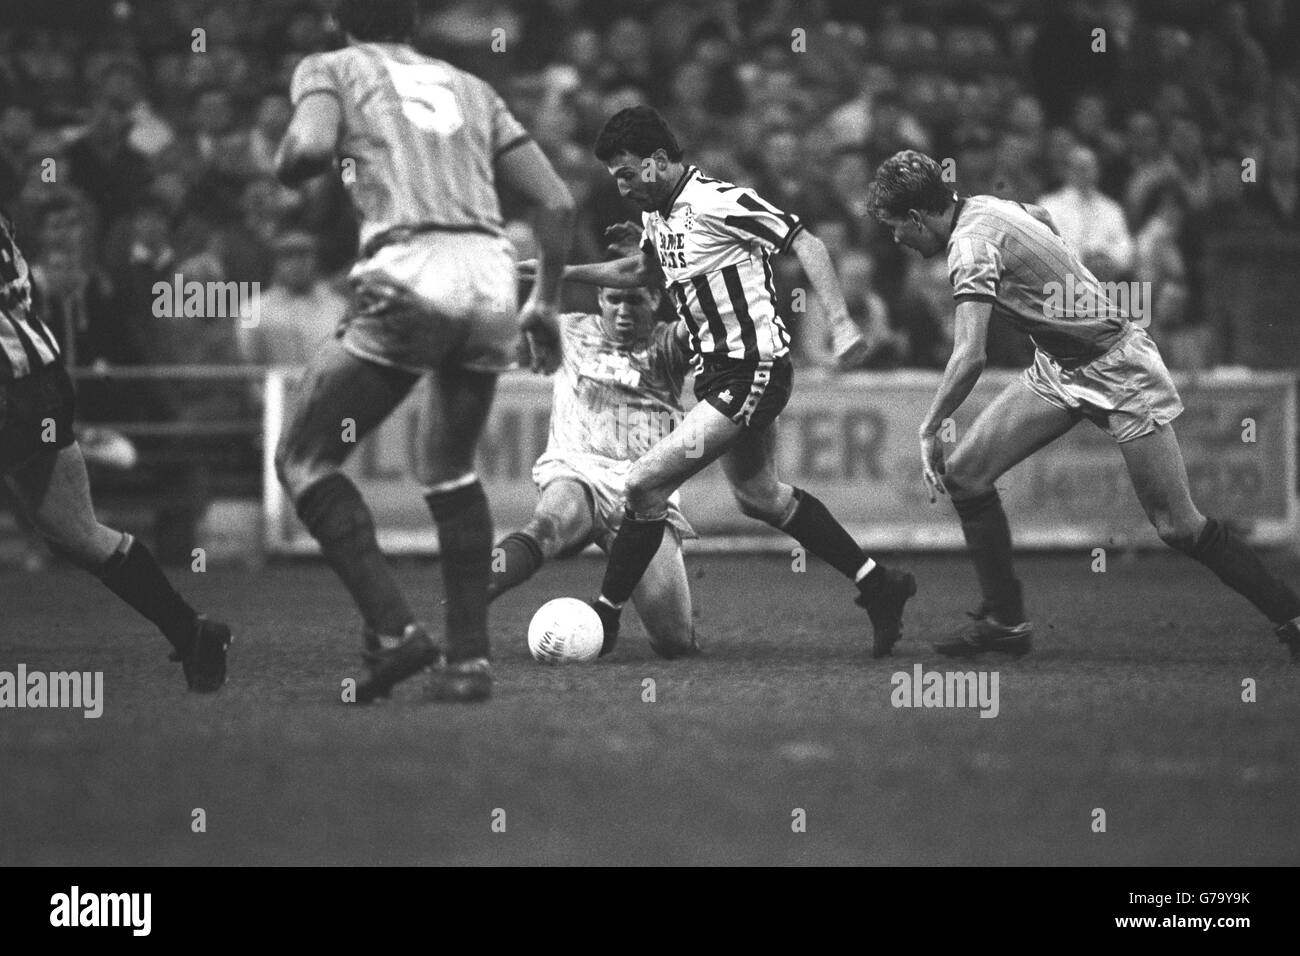 Soccer - Barclays League Division Three - Notts County v Brentford - Meadow Lane. Notts County's Garry Birltes skips past Brentford's Terry Evans (5) and Andy Feeley. Stock Photo